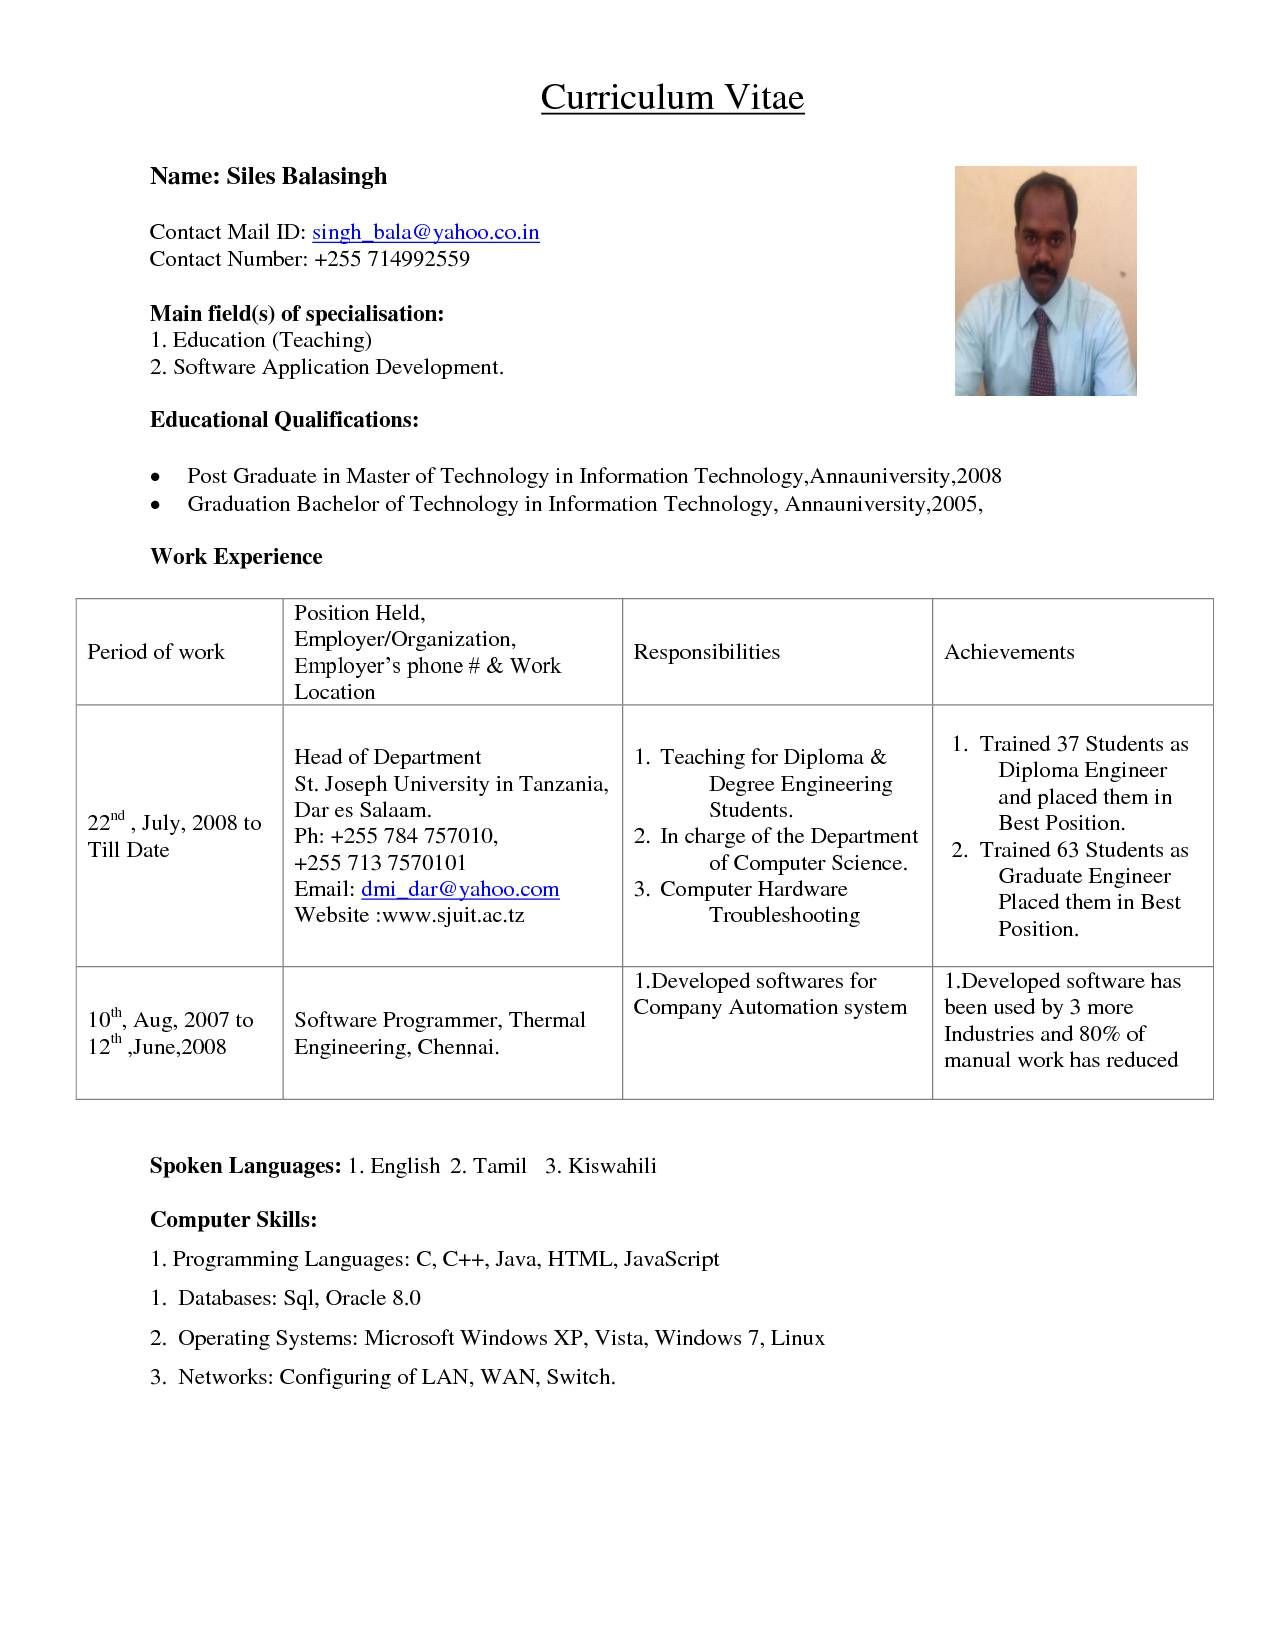 resume format for lecturer job in engineering college